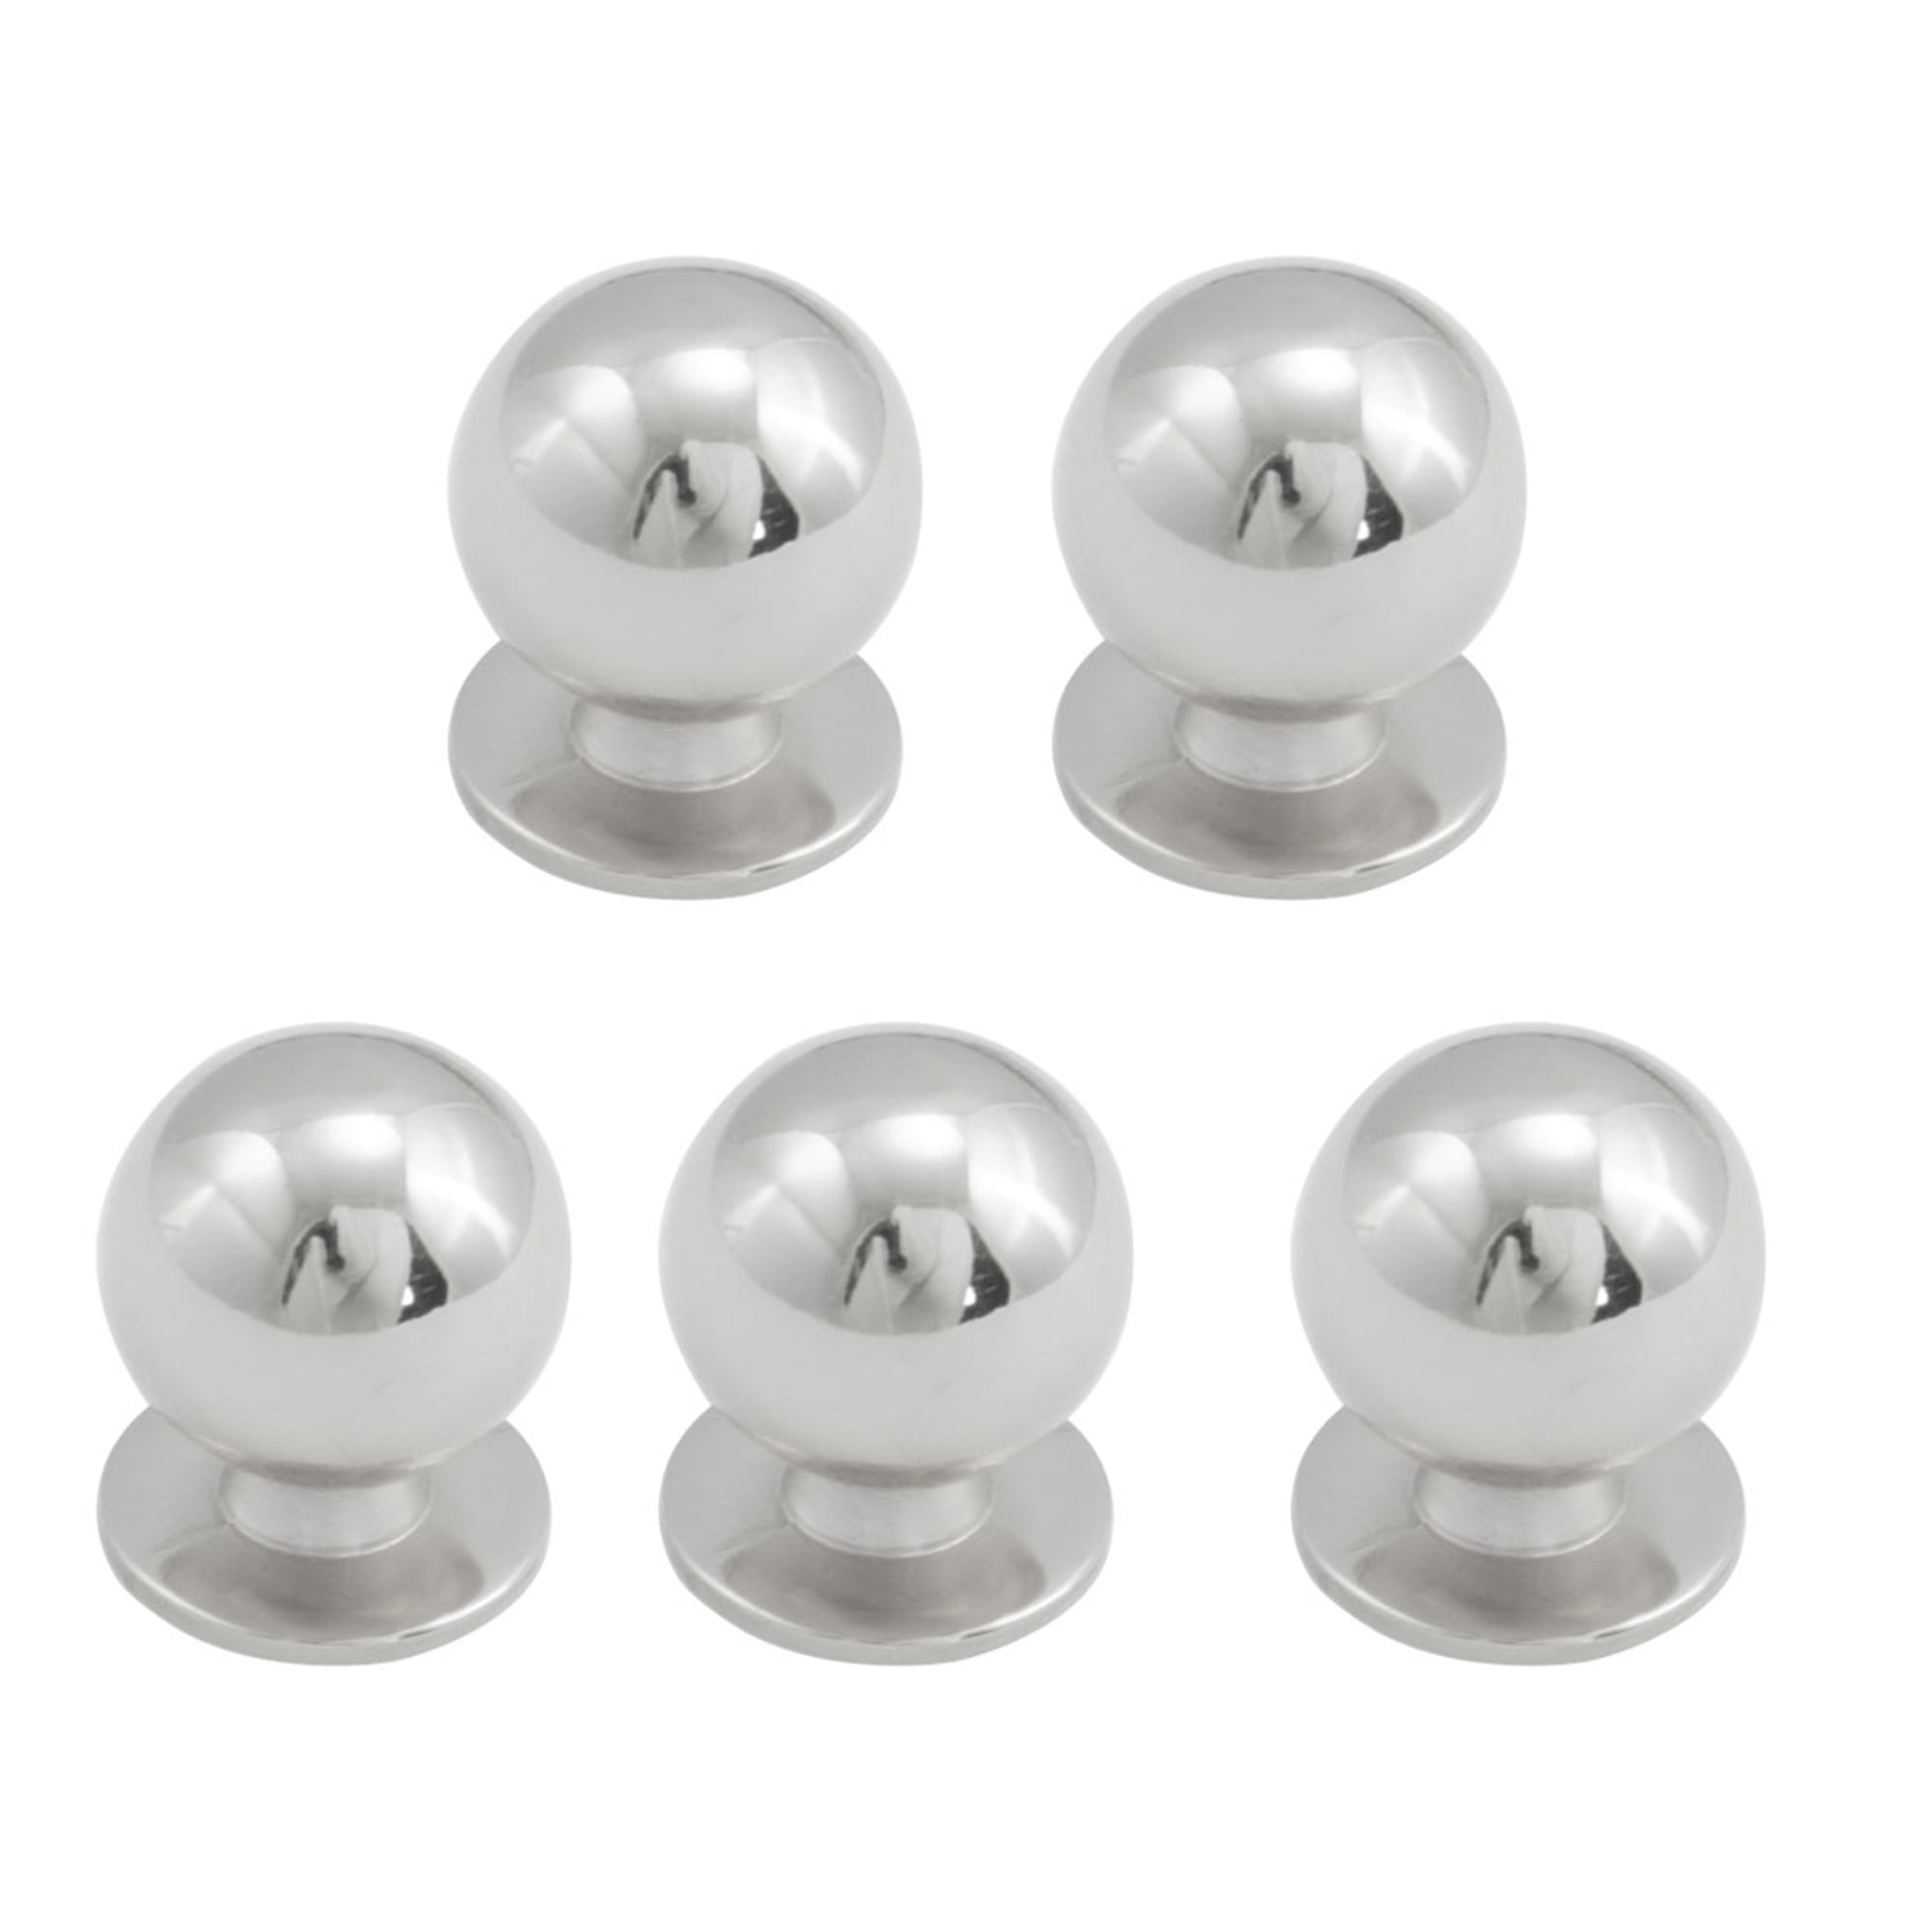 Zinc Alloy Knobs Round Wardrobe Dresser Knobs Pull Handle for Home Office Hotel Cupboard Cabinet Silver Tone 5pcs